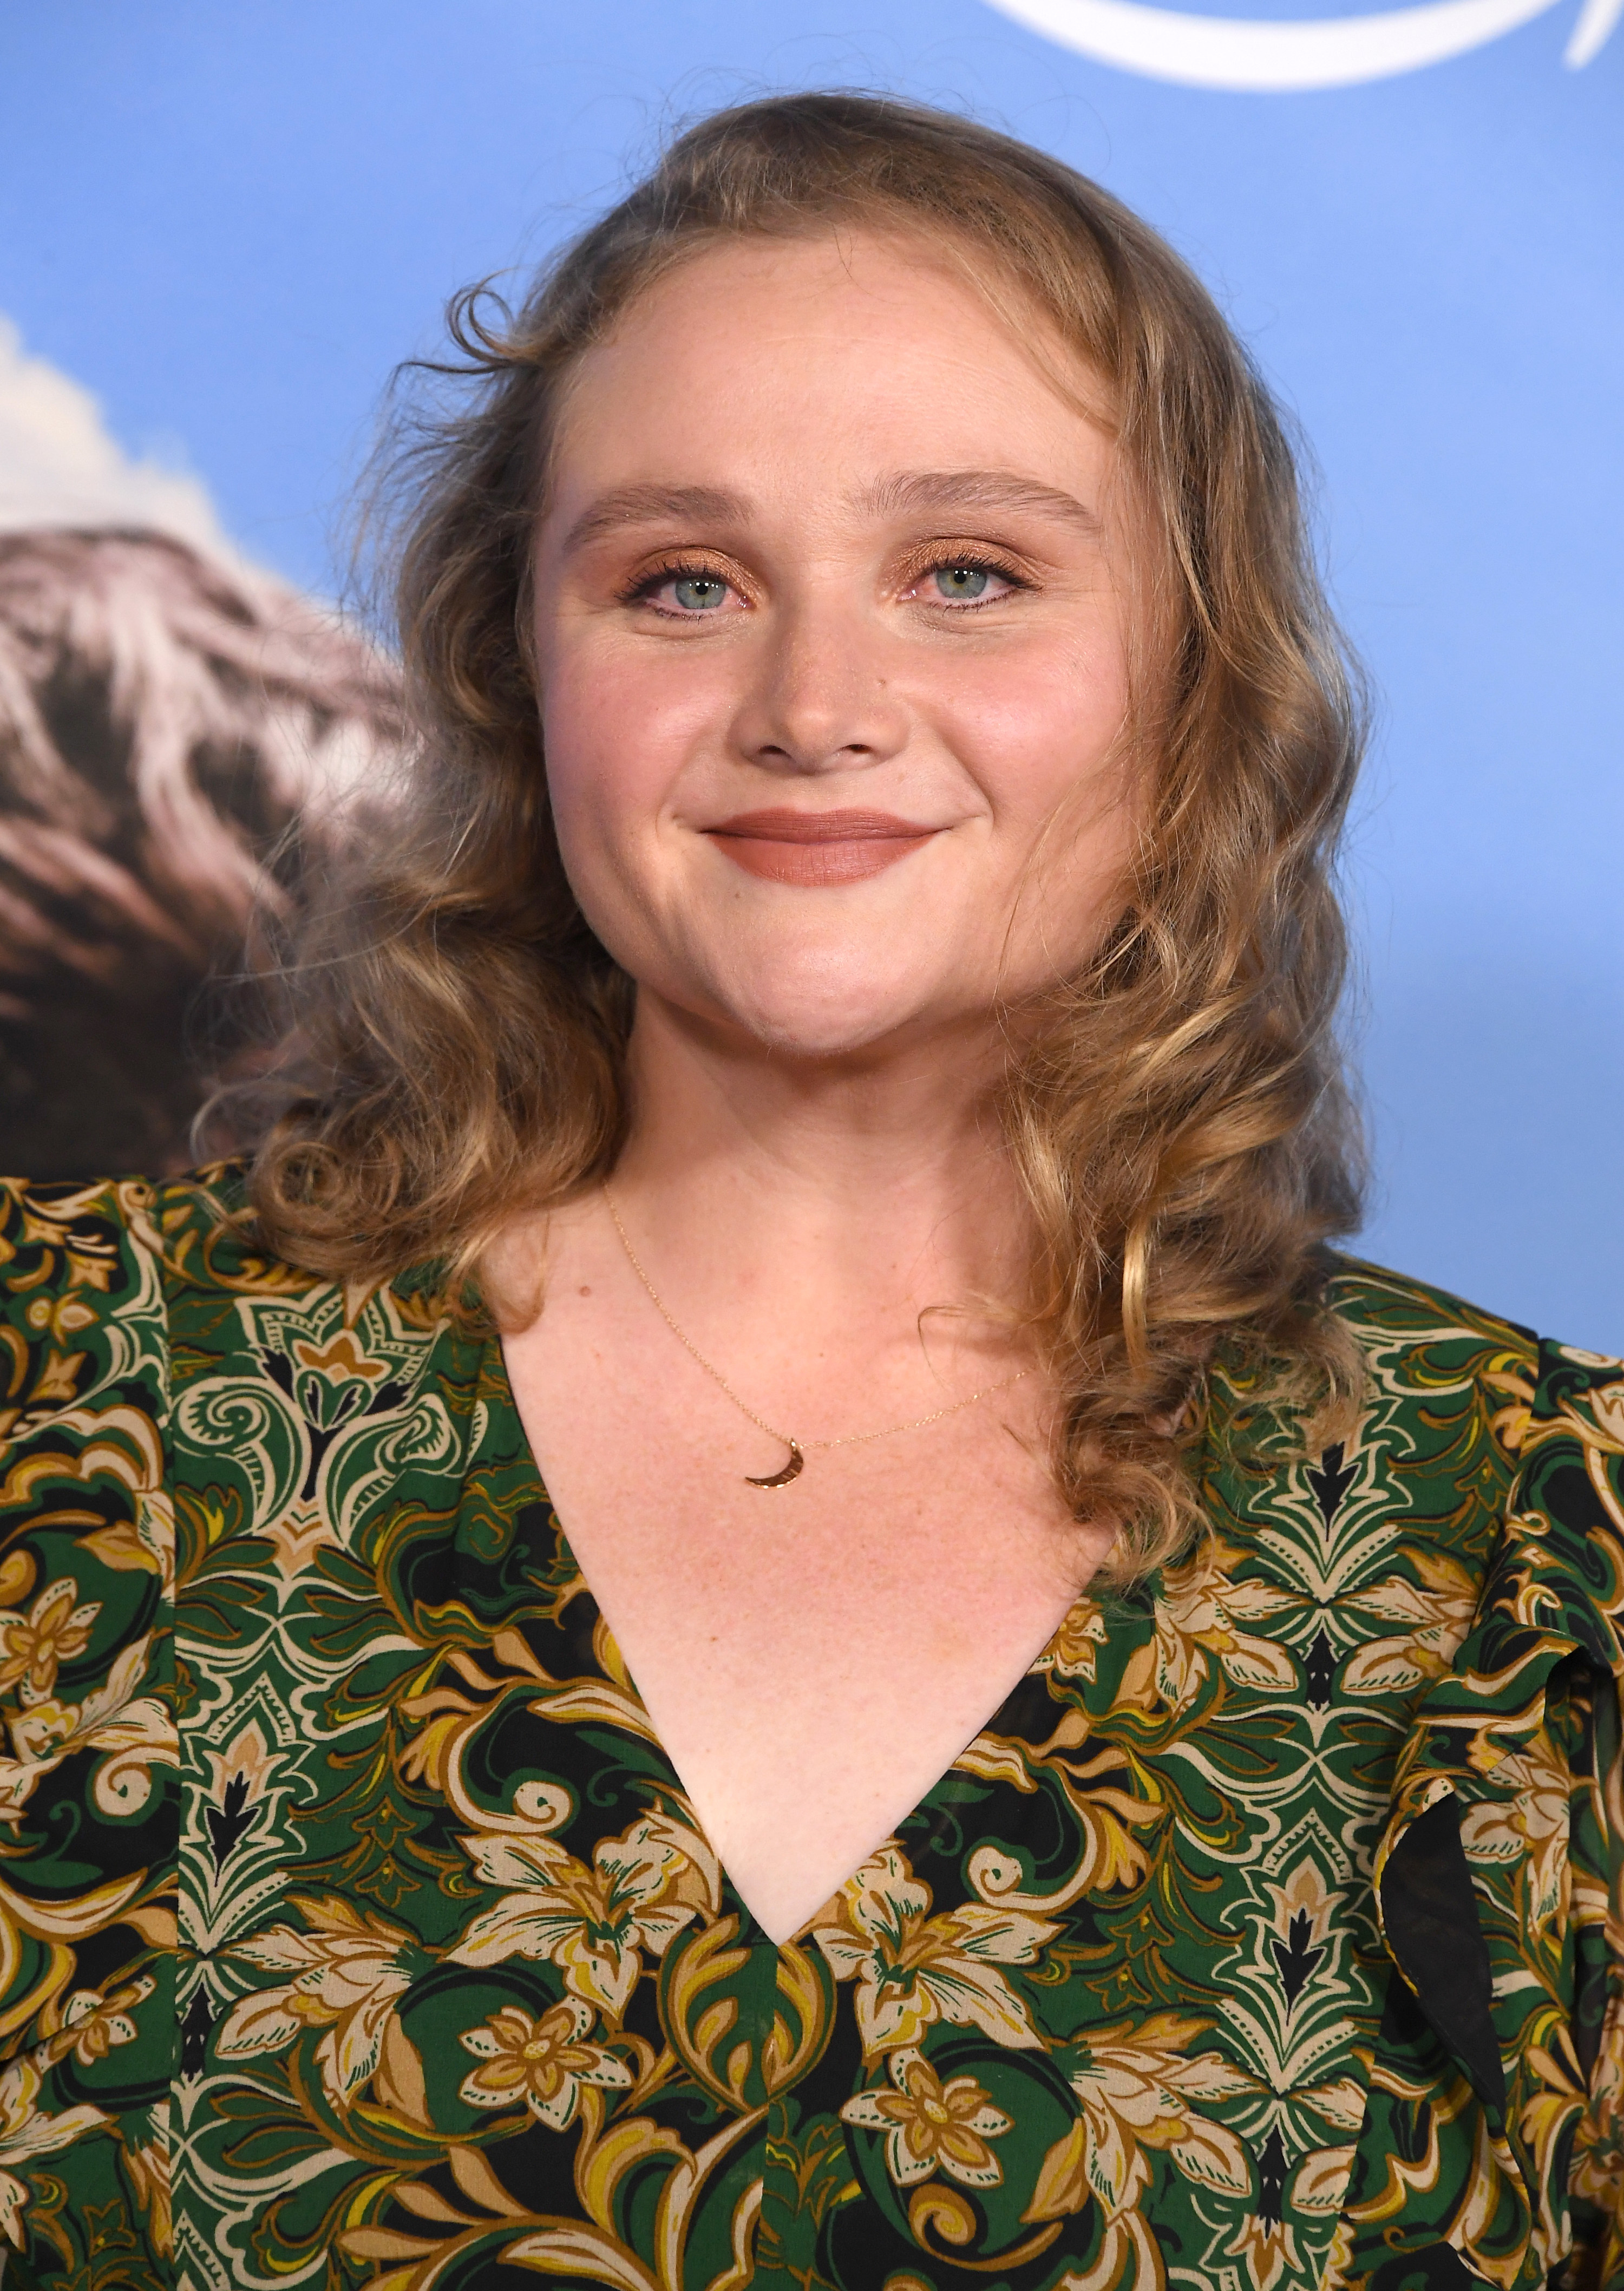 Danielle Macdonald on the red carpet